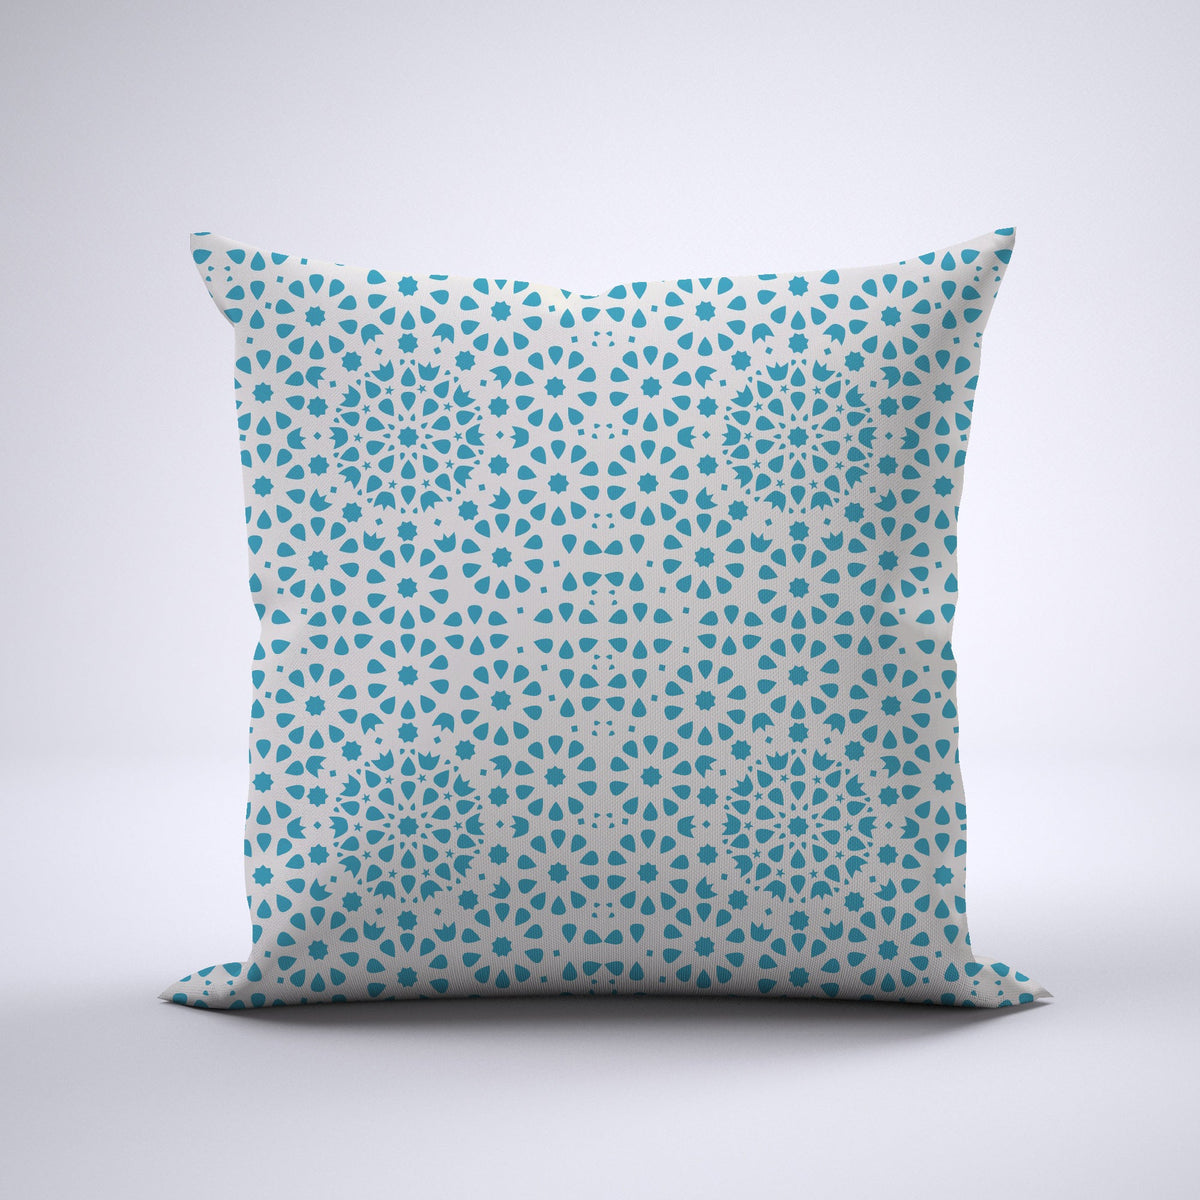 Throw Pillow - Charlotte Teal Bedding Collections, Pillows, Throw Pillows MWW 